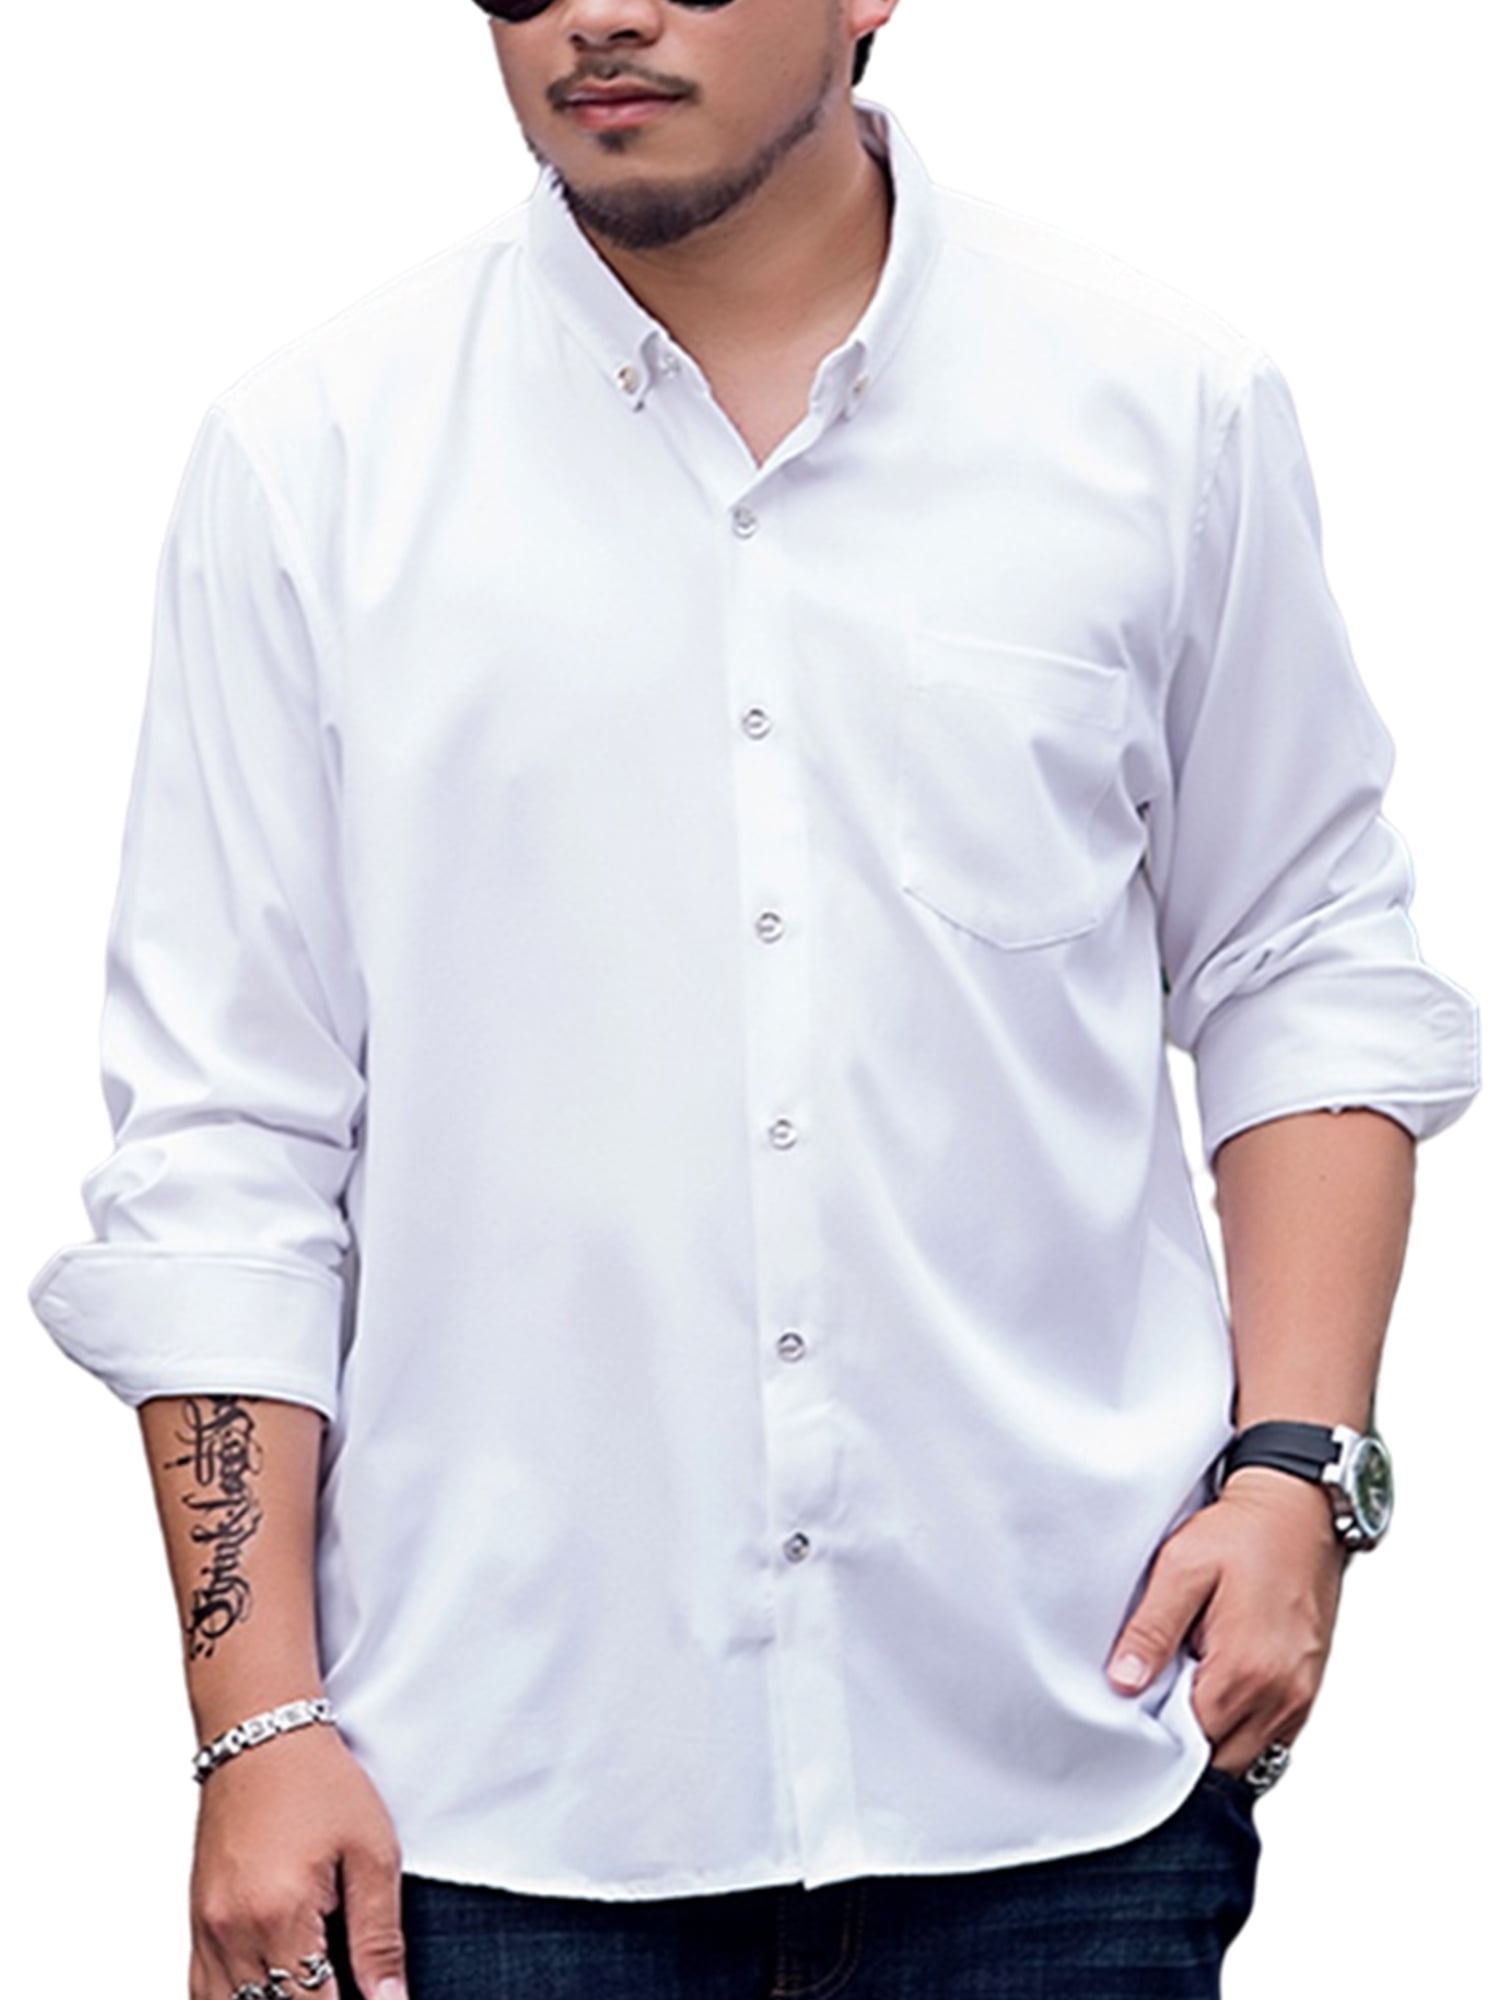 RDHOPE-Men Plus Size Regular-Fit Solid Relaxed Botton Front Work Shirt